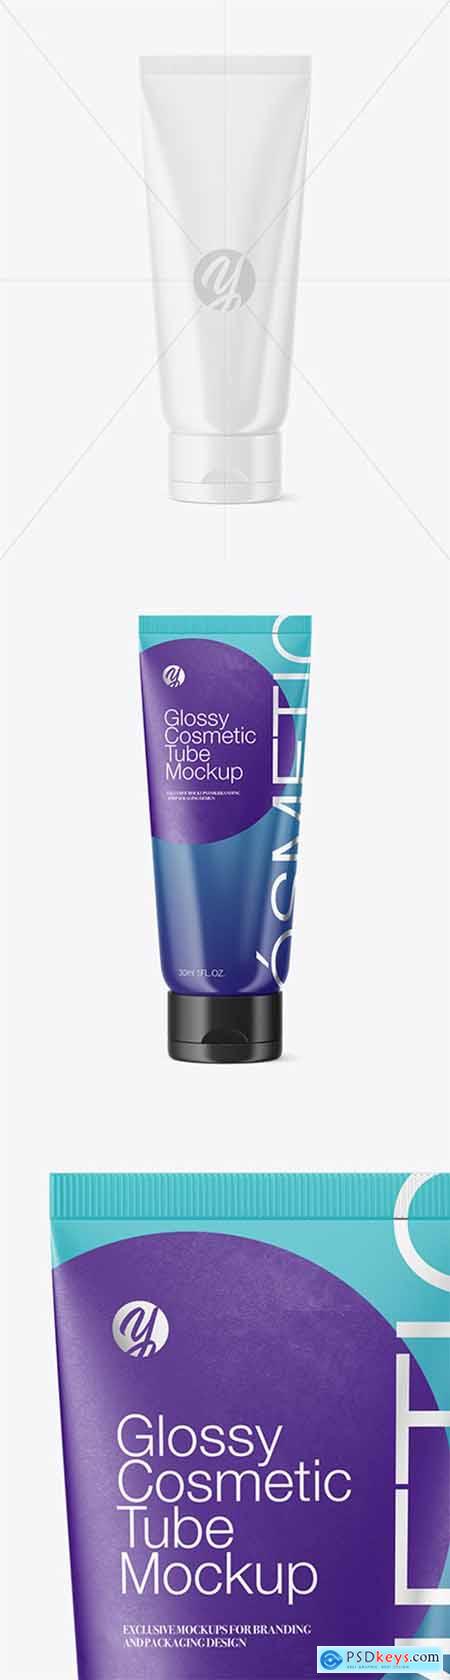 Download Glossy Cosmetic Tube Mockup 64849 Free Download Photoshop Vector Stock Image Via Torrent Zippyshare From Psdkeys Com